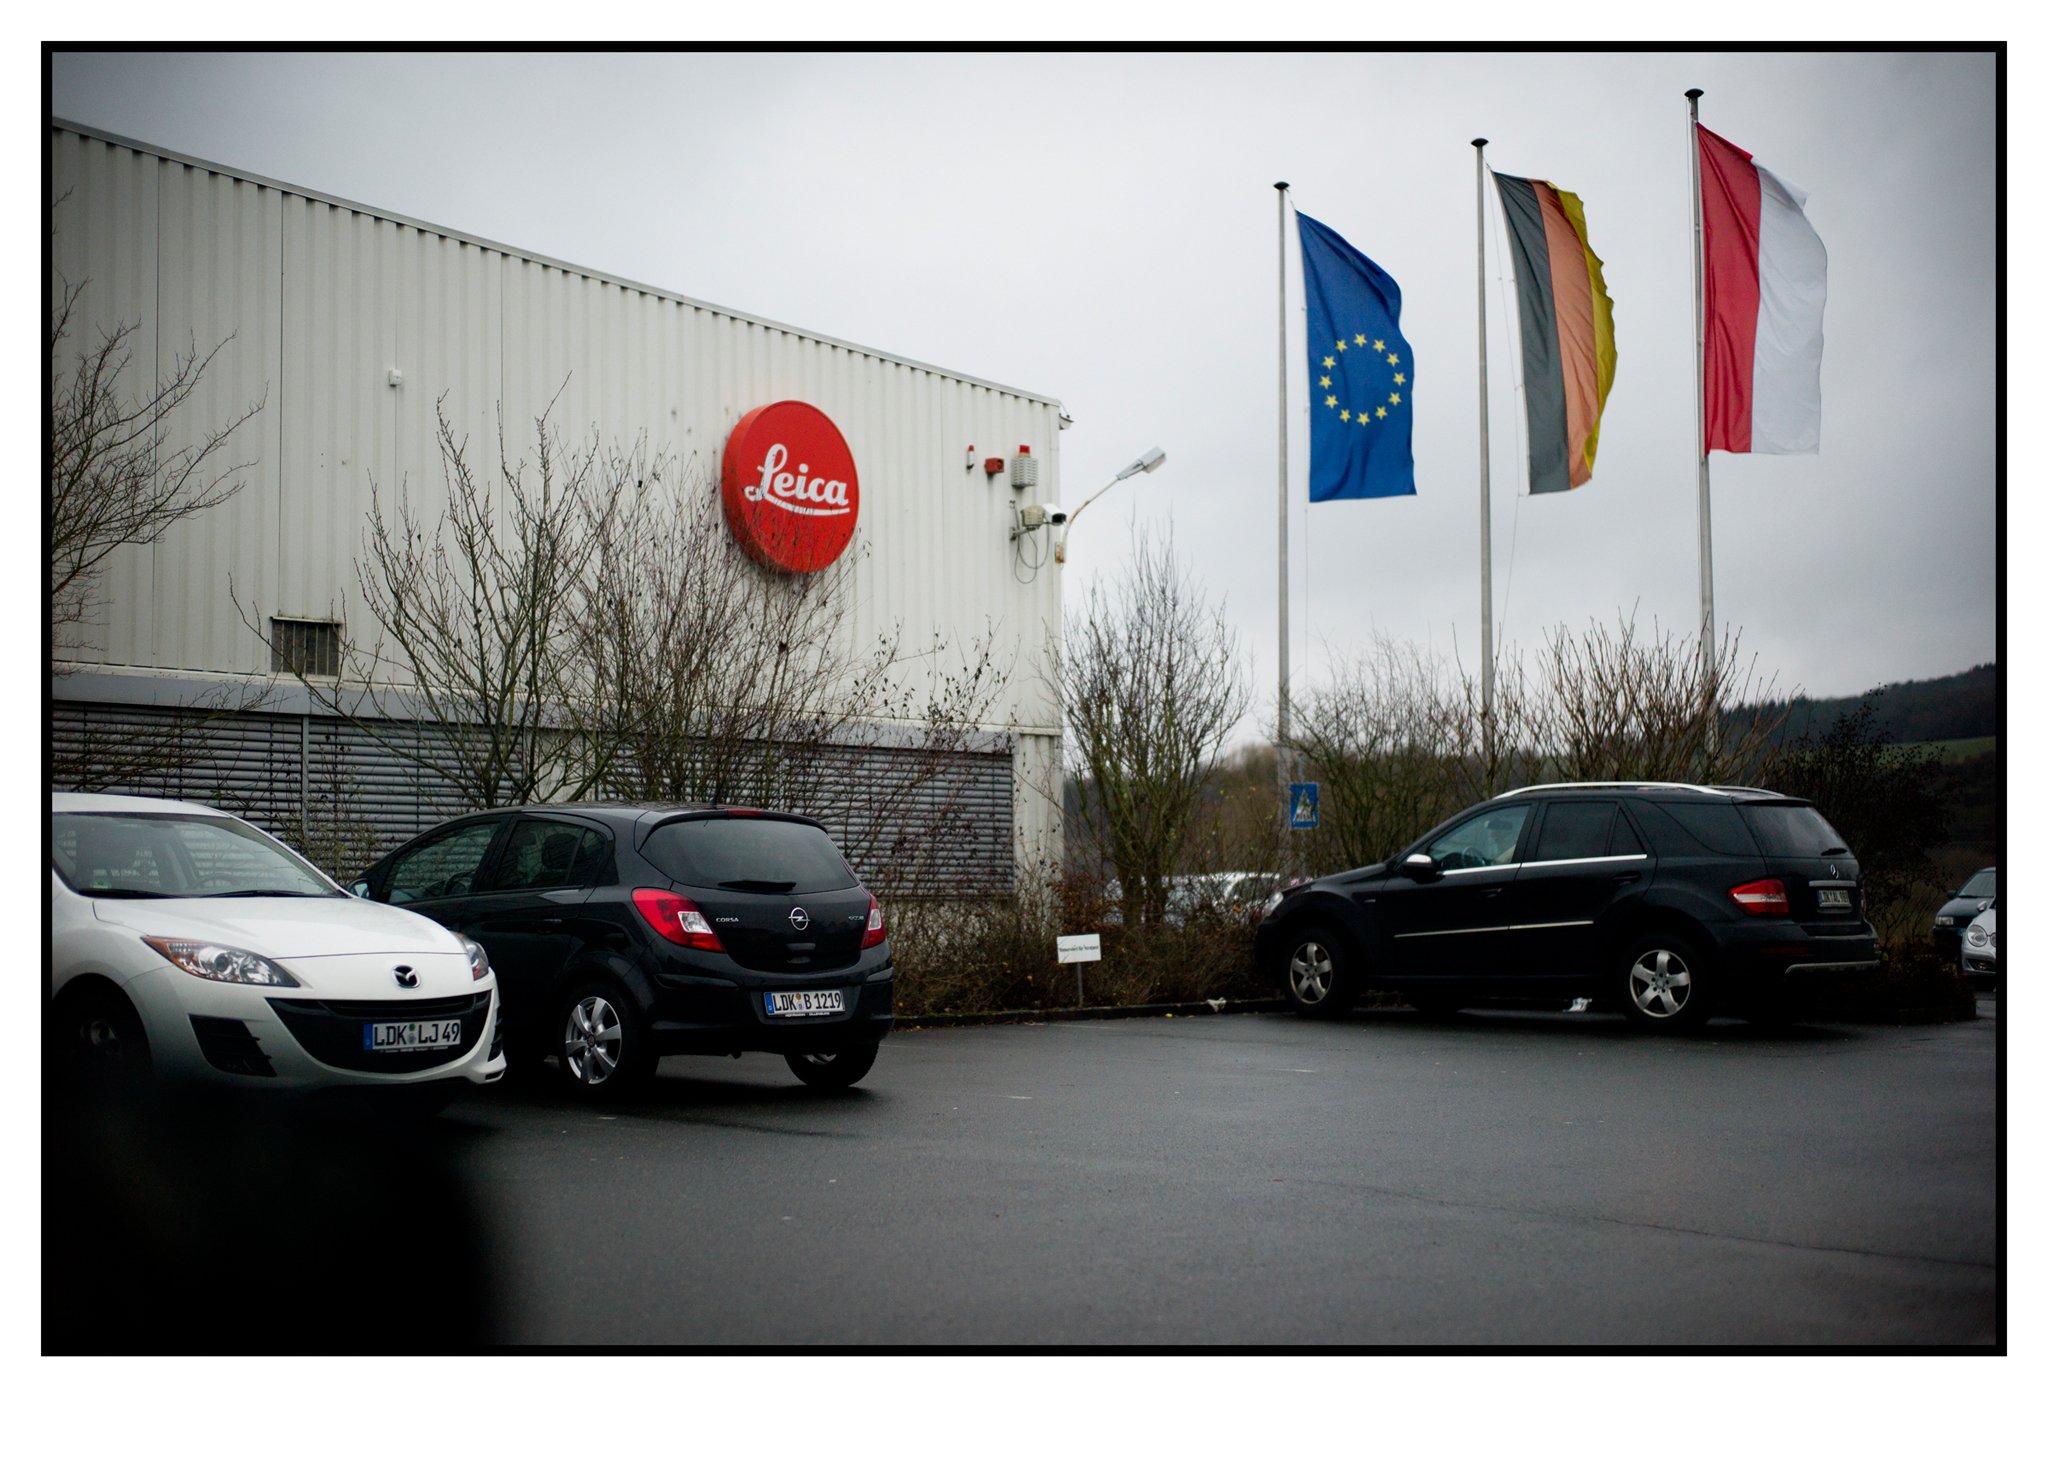 The Leica Factory | Solms, Germany, 2011